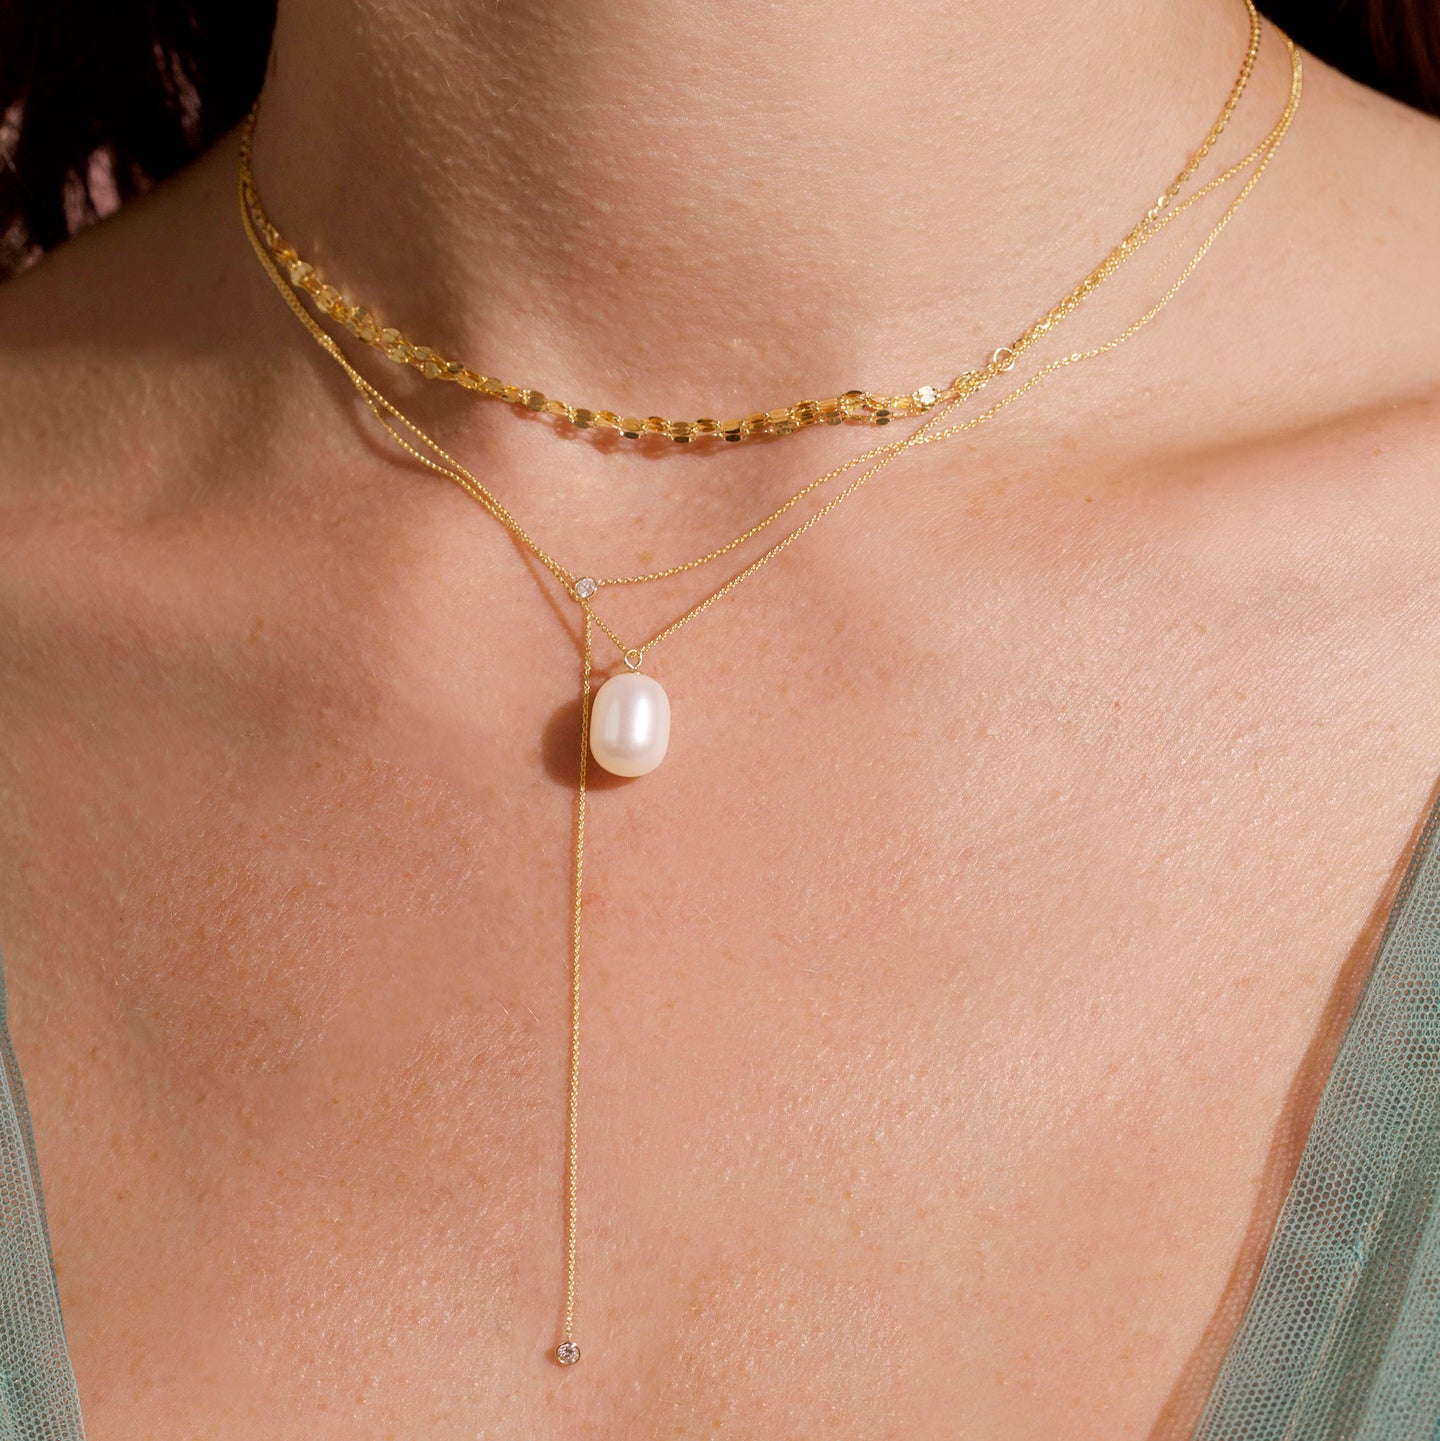 Stone and Strand Gold Chain Necklace